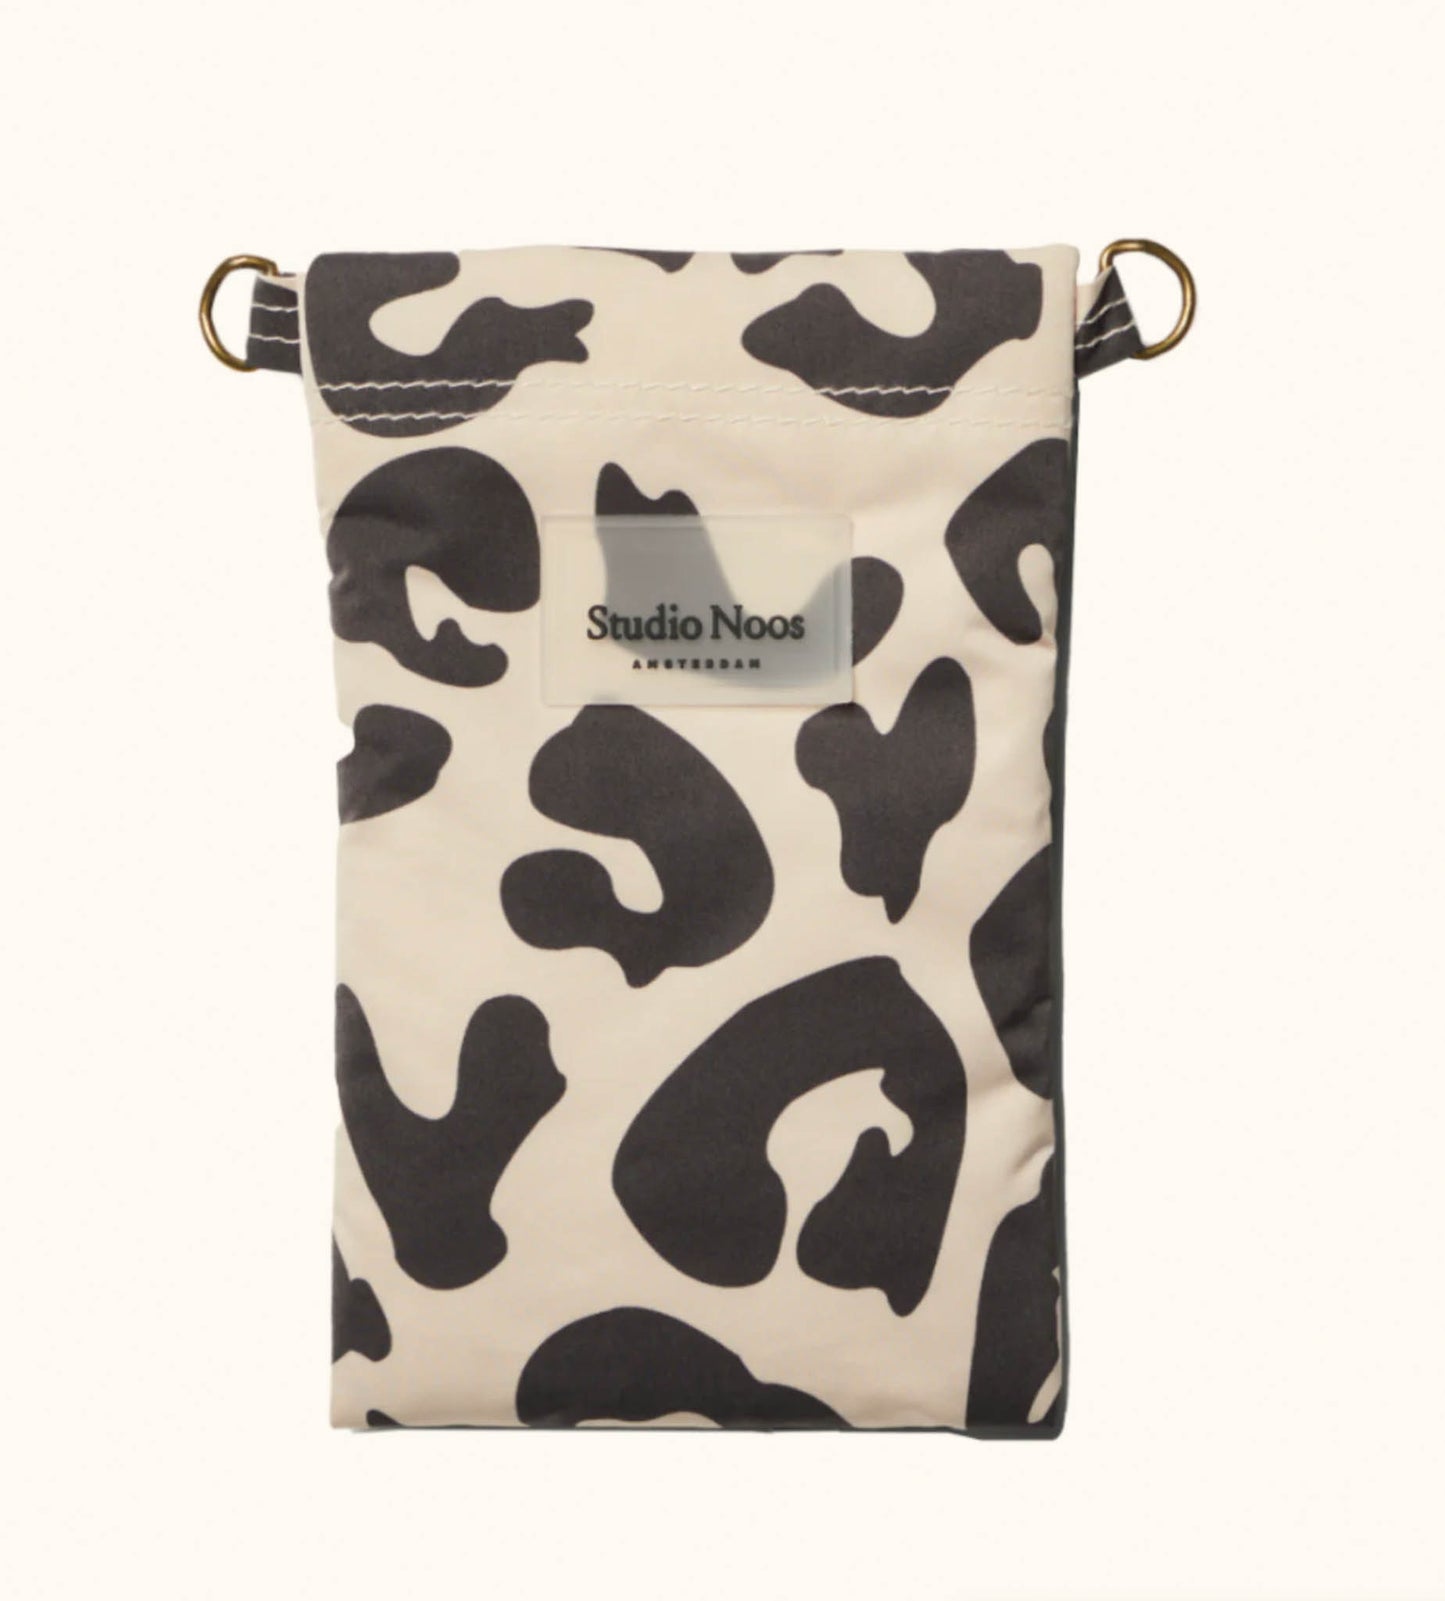 Studio Noos - Handytasche "Holy Cow Puffy Phone Bag " | holy cow